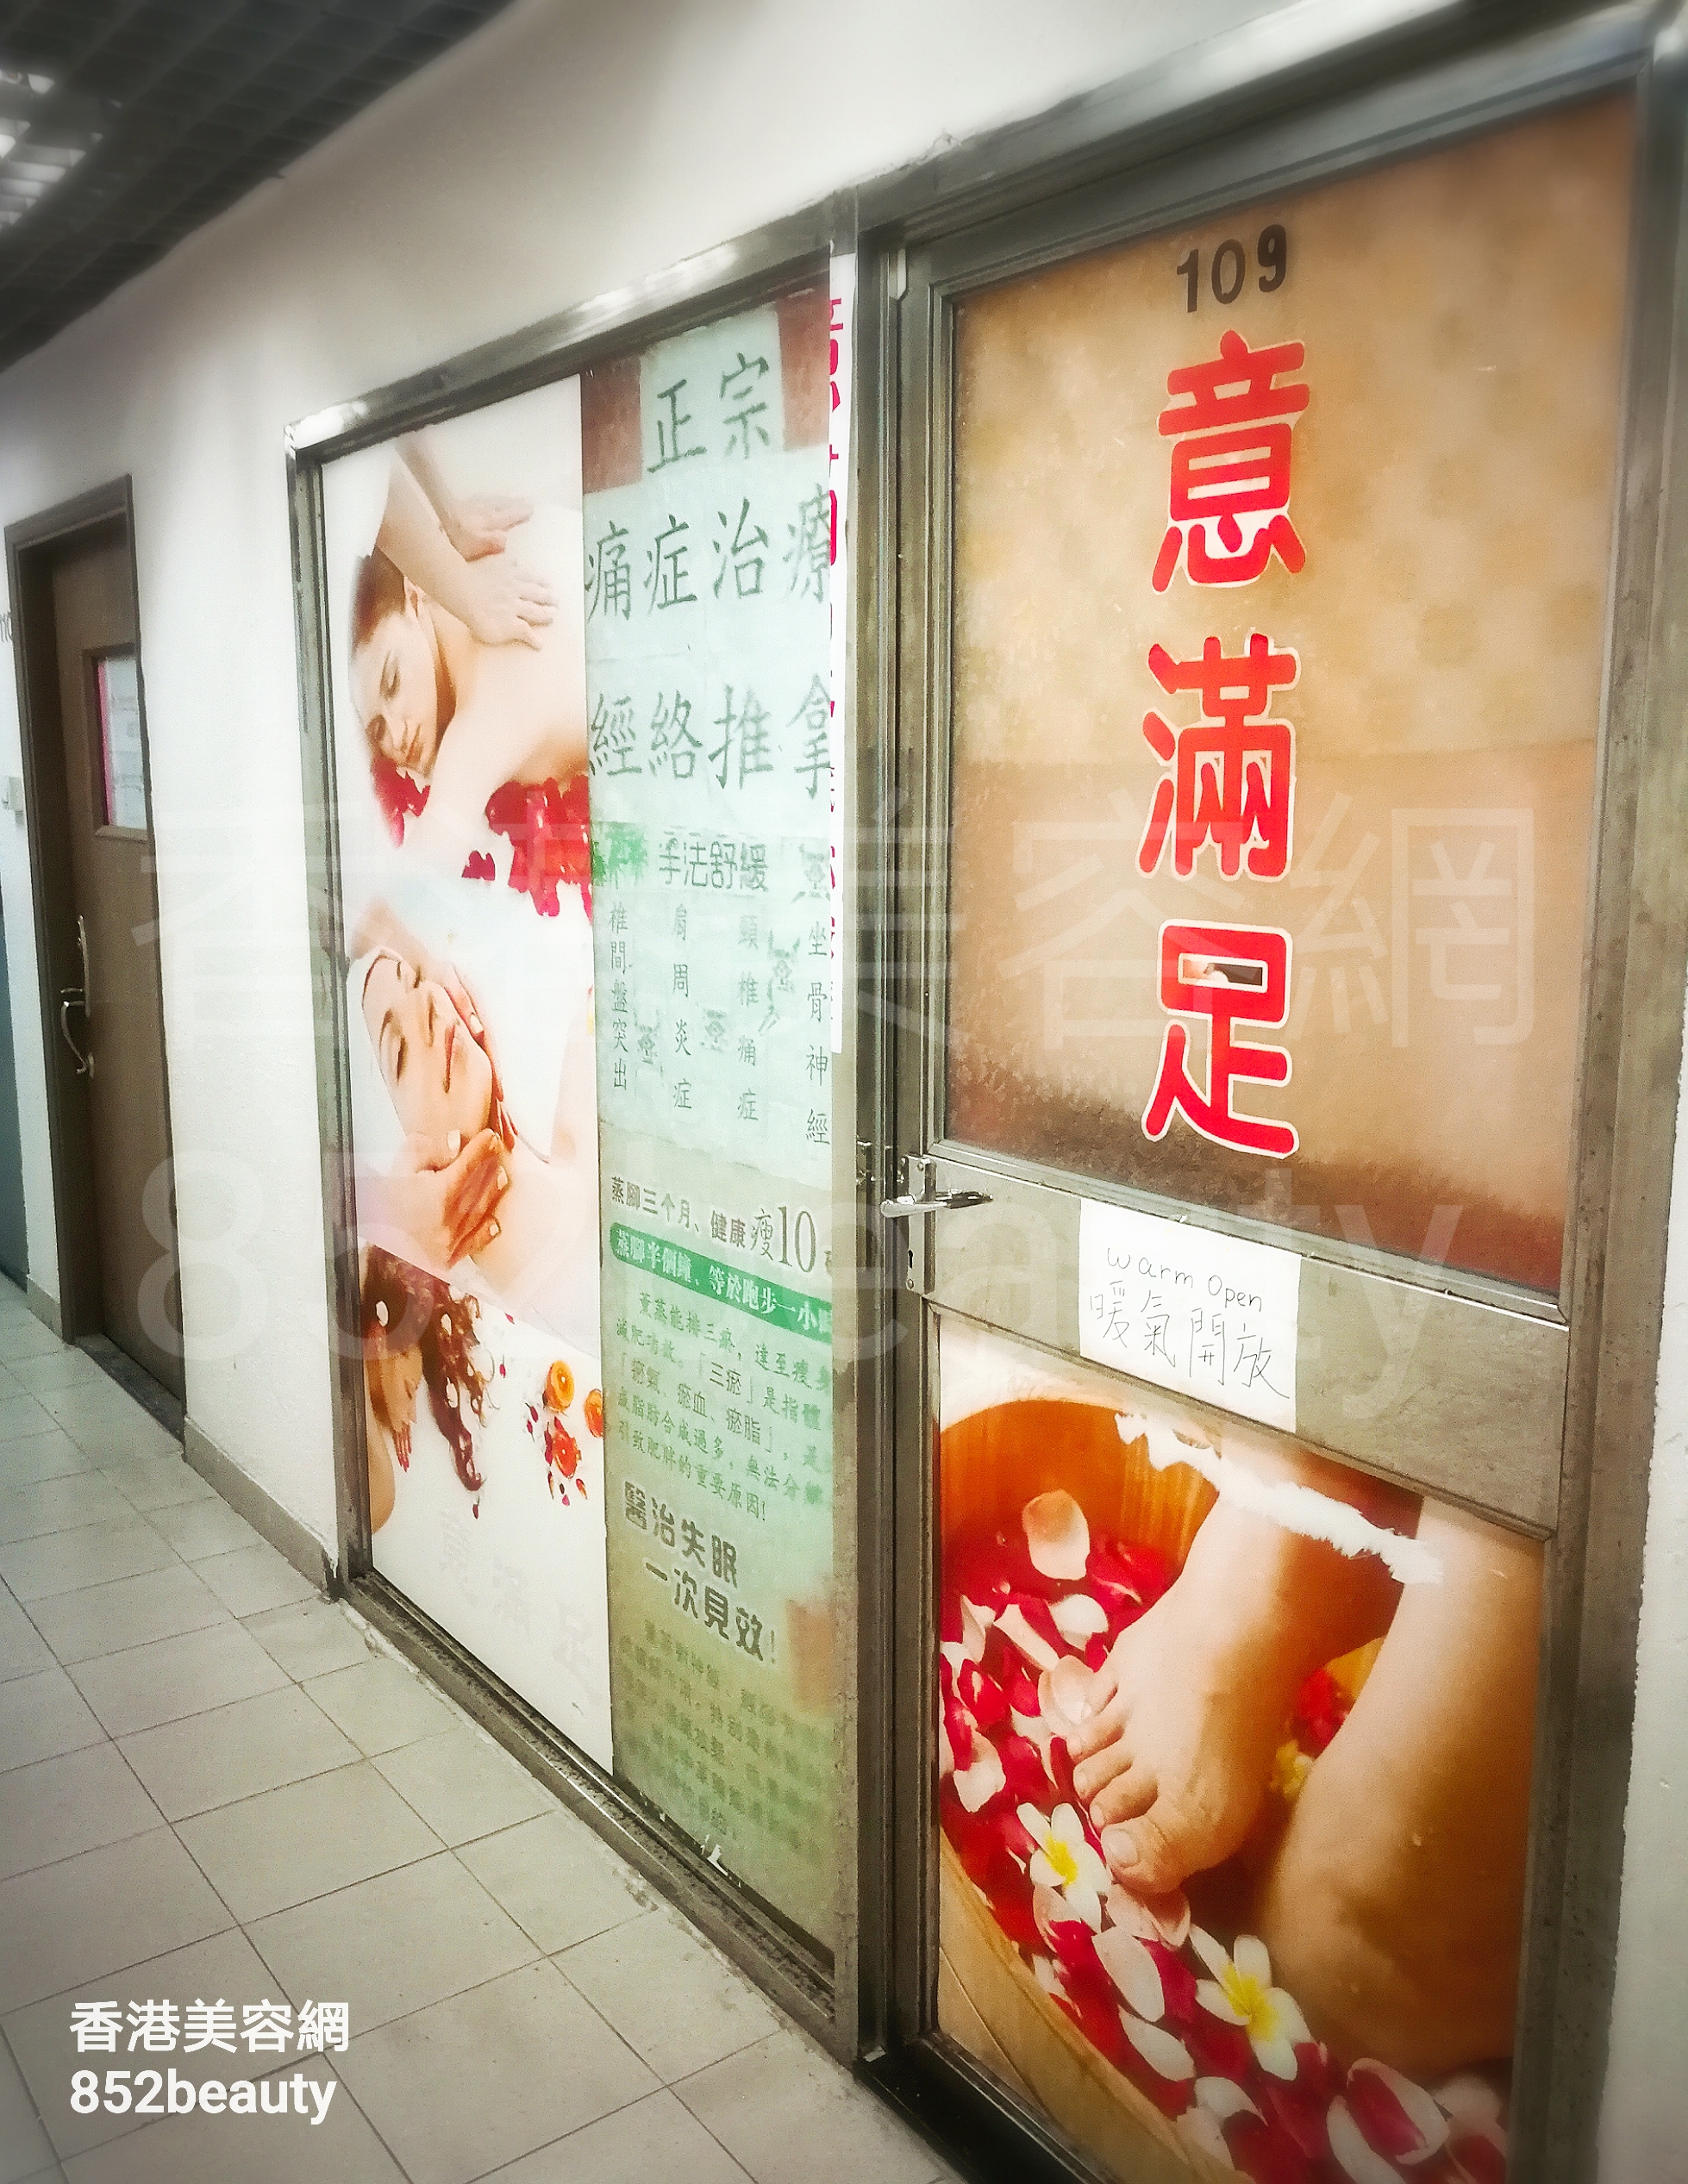 Hand and foot care: 意滿足